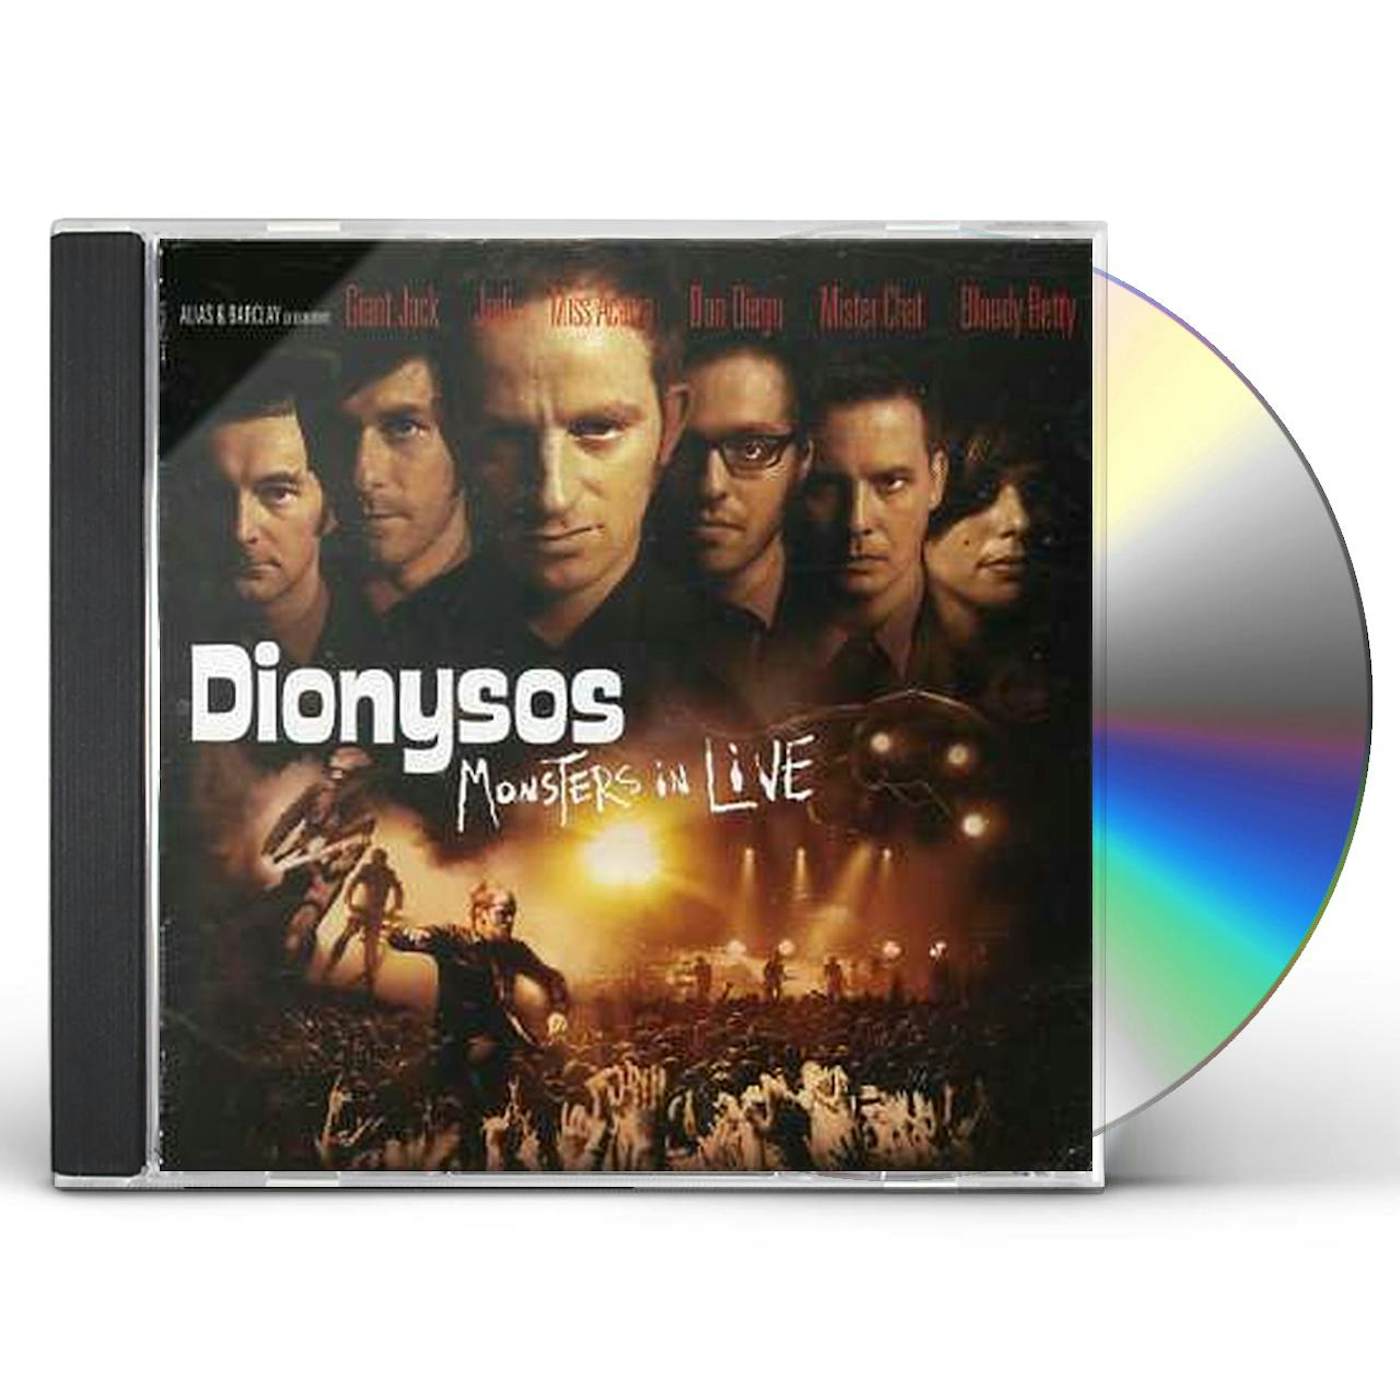 Dionysos MONSTER IN LIVE CD